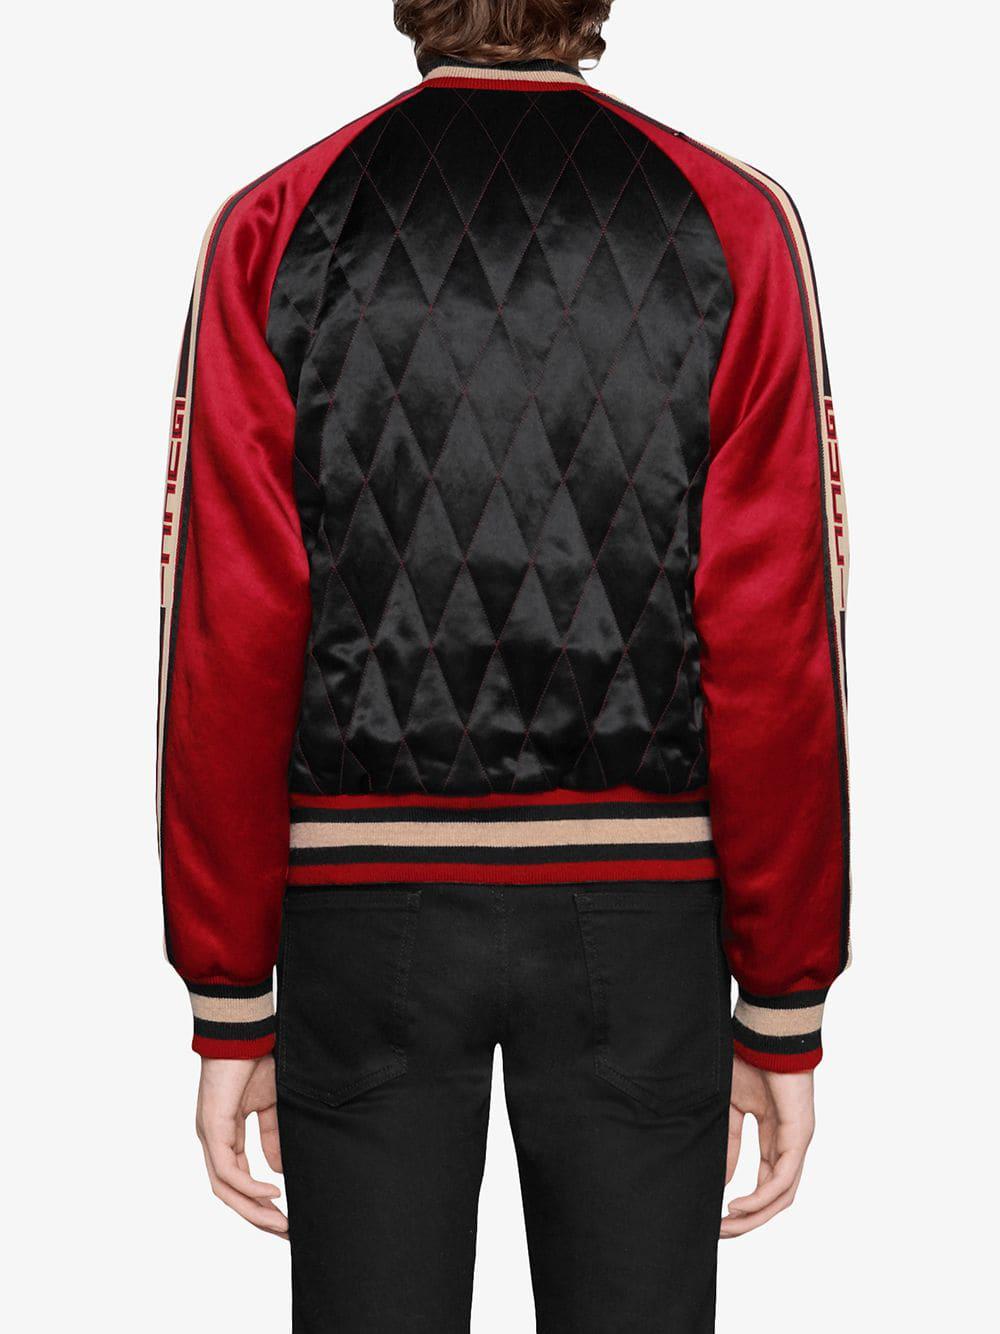 red gucci jacket